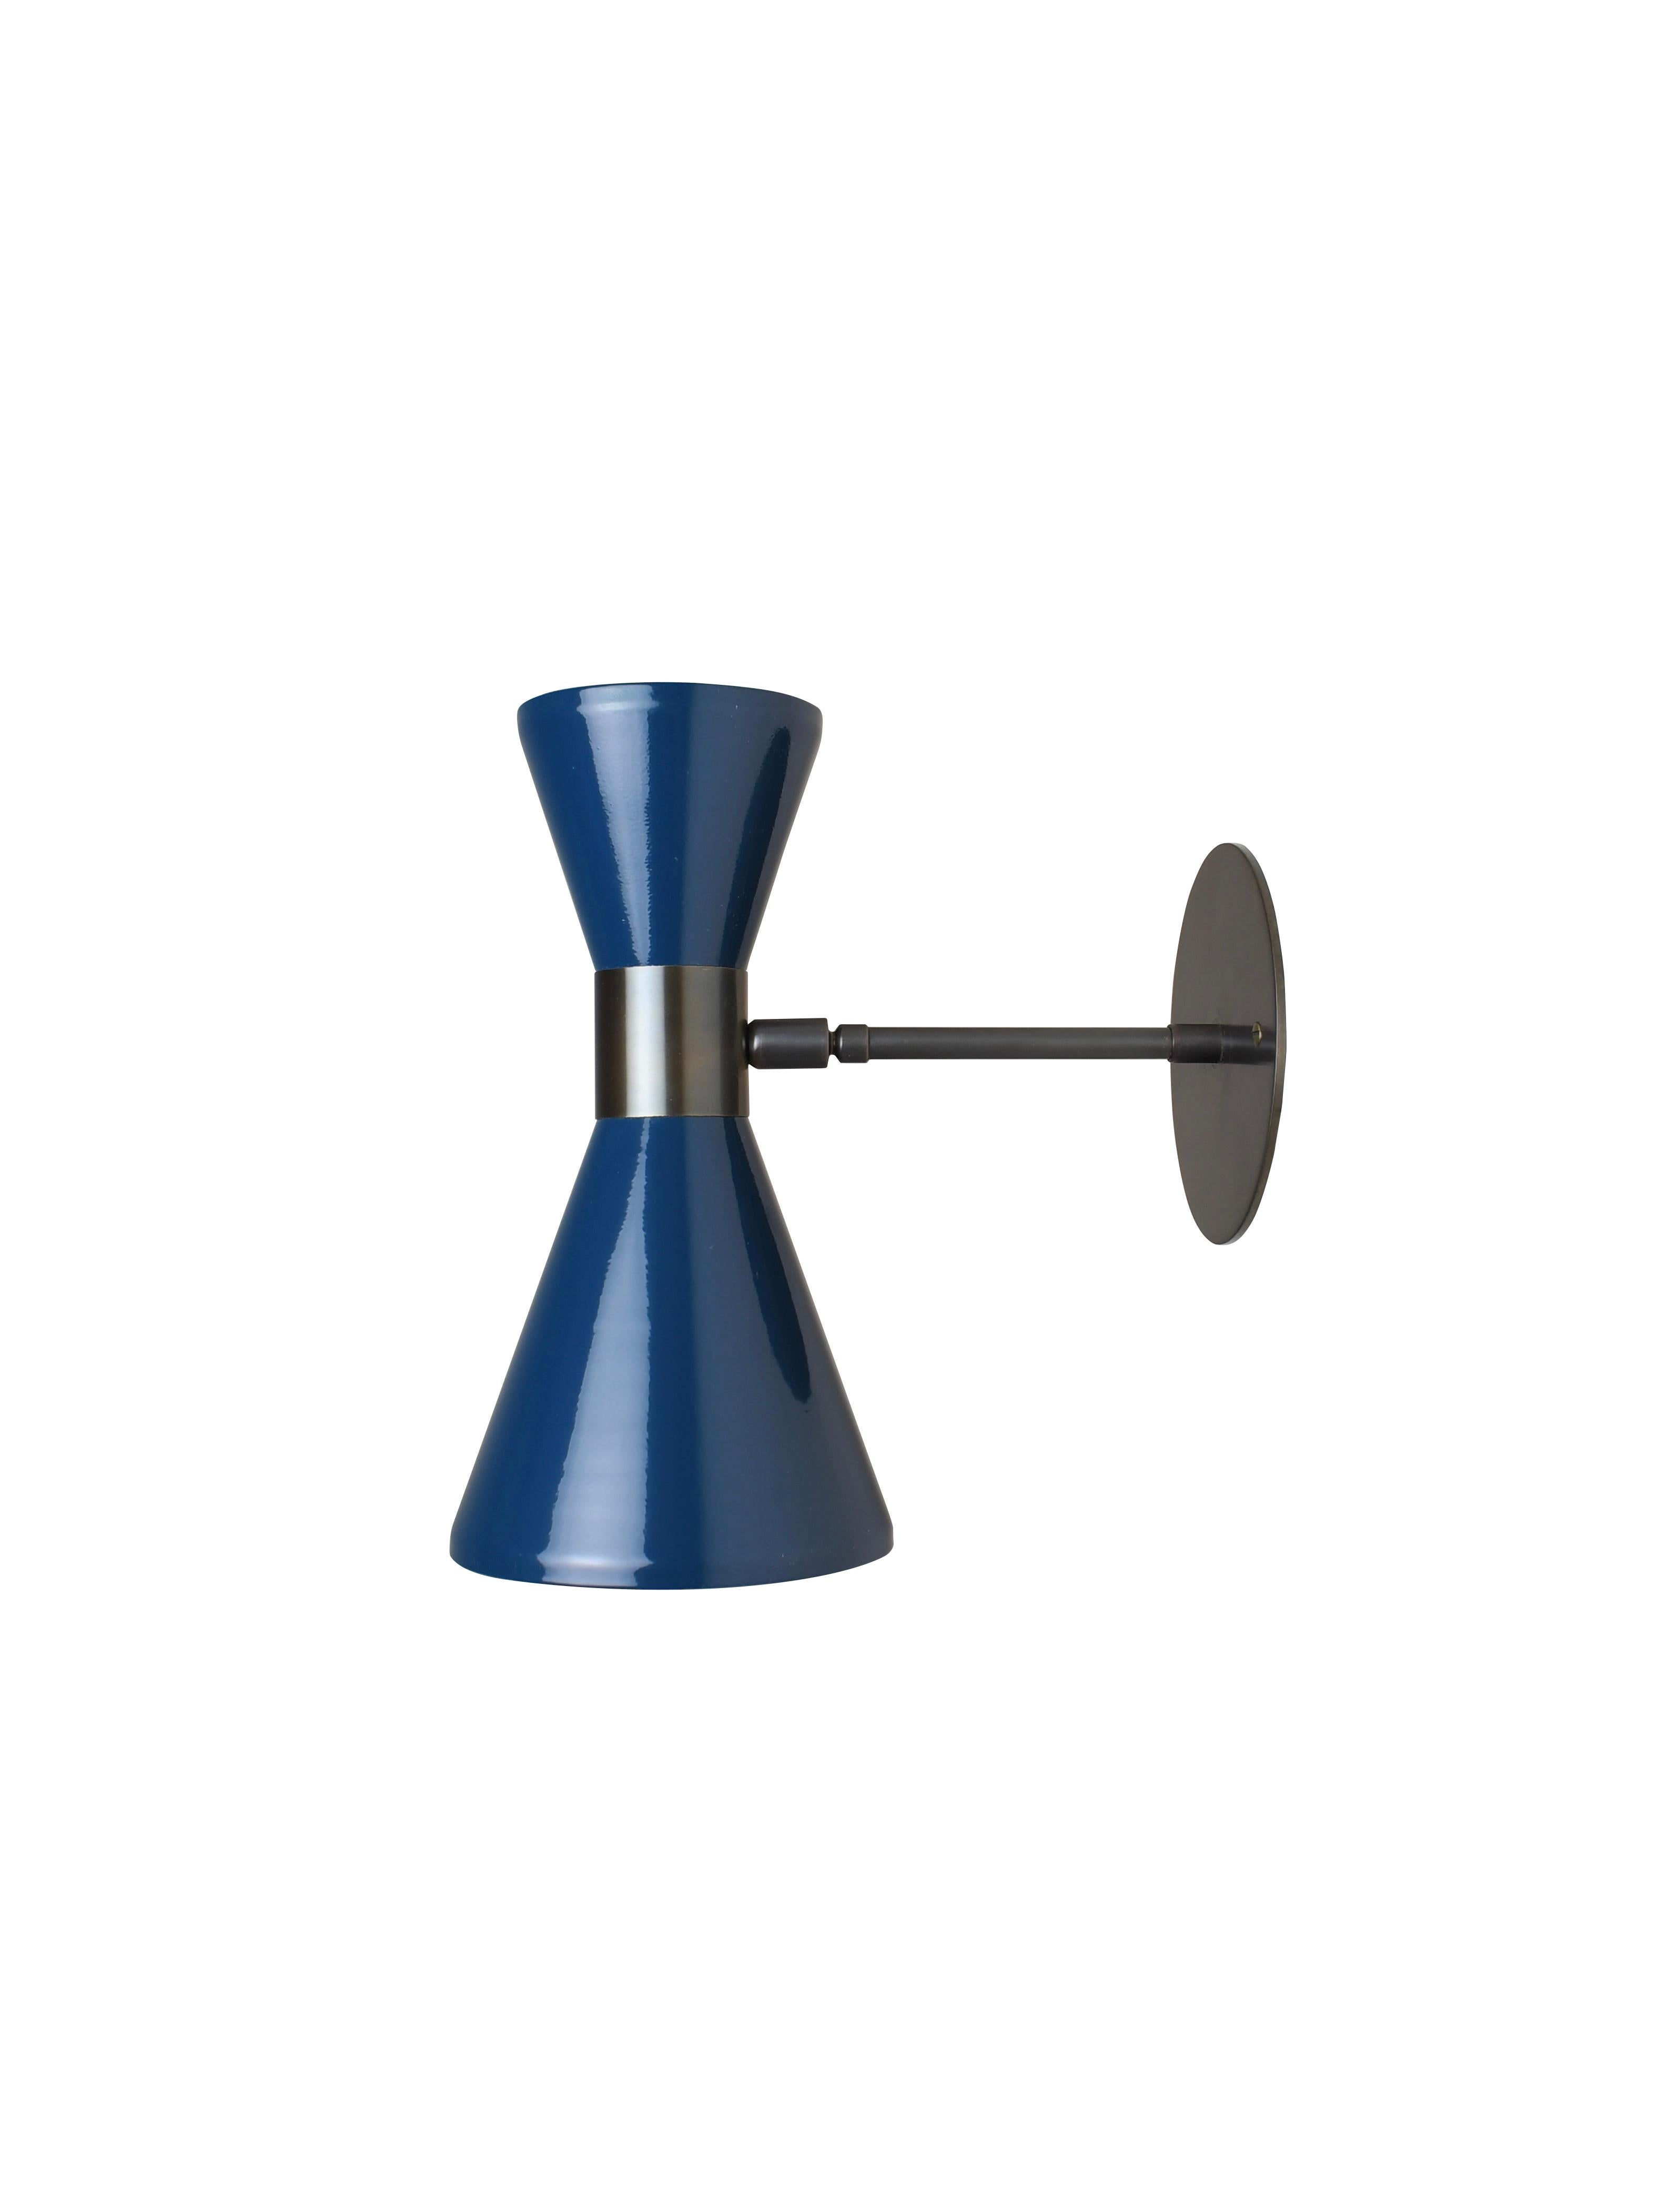 The Campana wall sconce or reading light shown in oil-rubbed bronze and dark blue enamel by Blueprint Lighting, 2018. The wide band and distinctly bevelled edge makes the Campana a strong design statement. Swiveling head allows for cone adjustment.